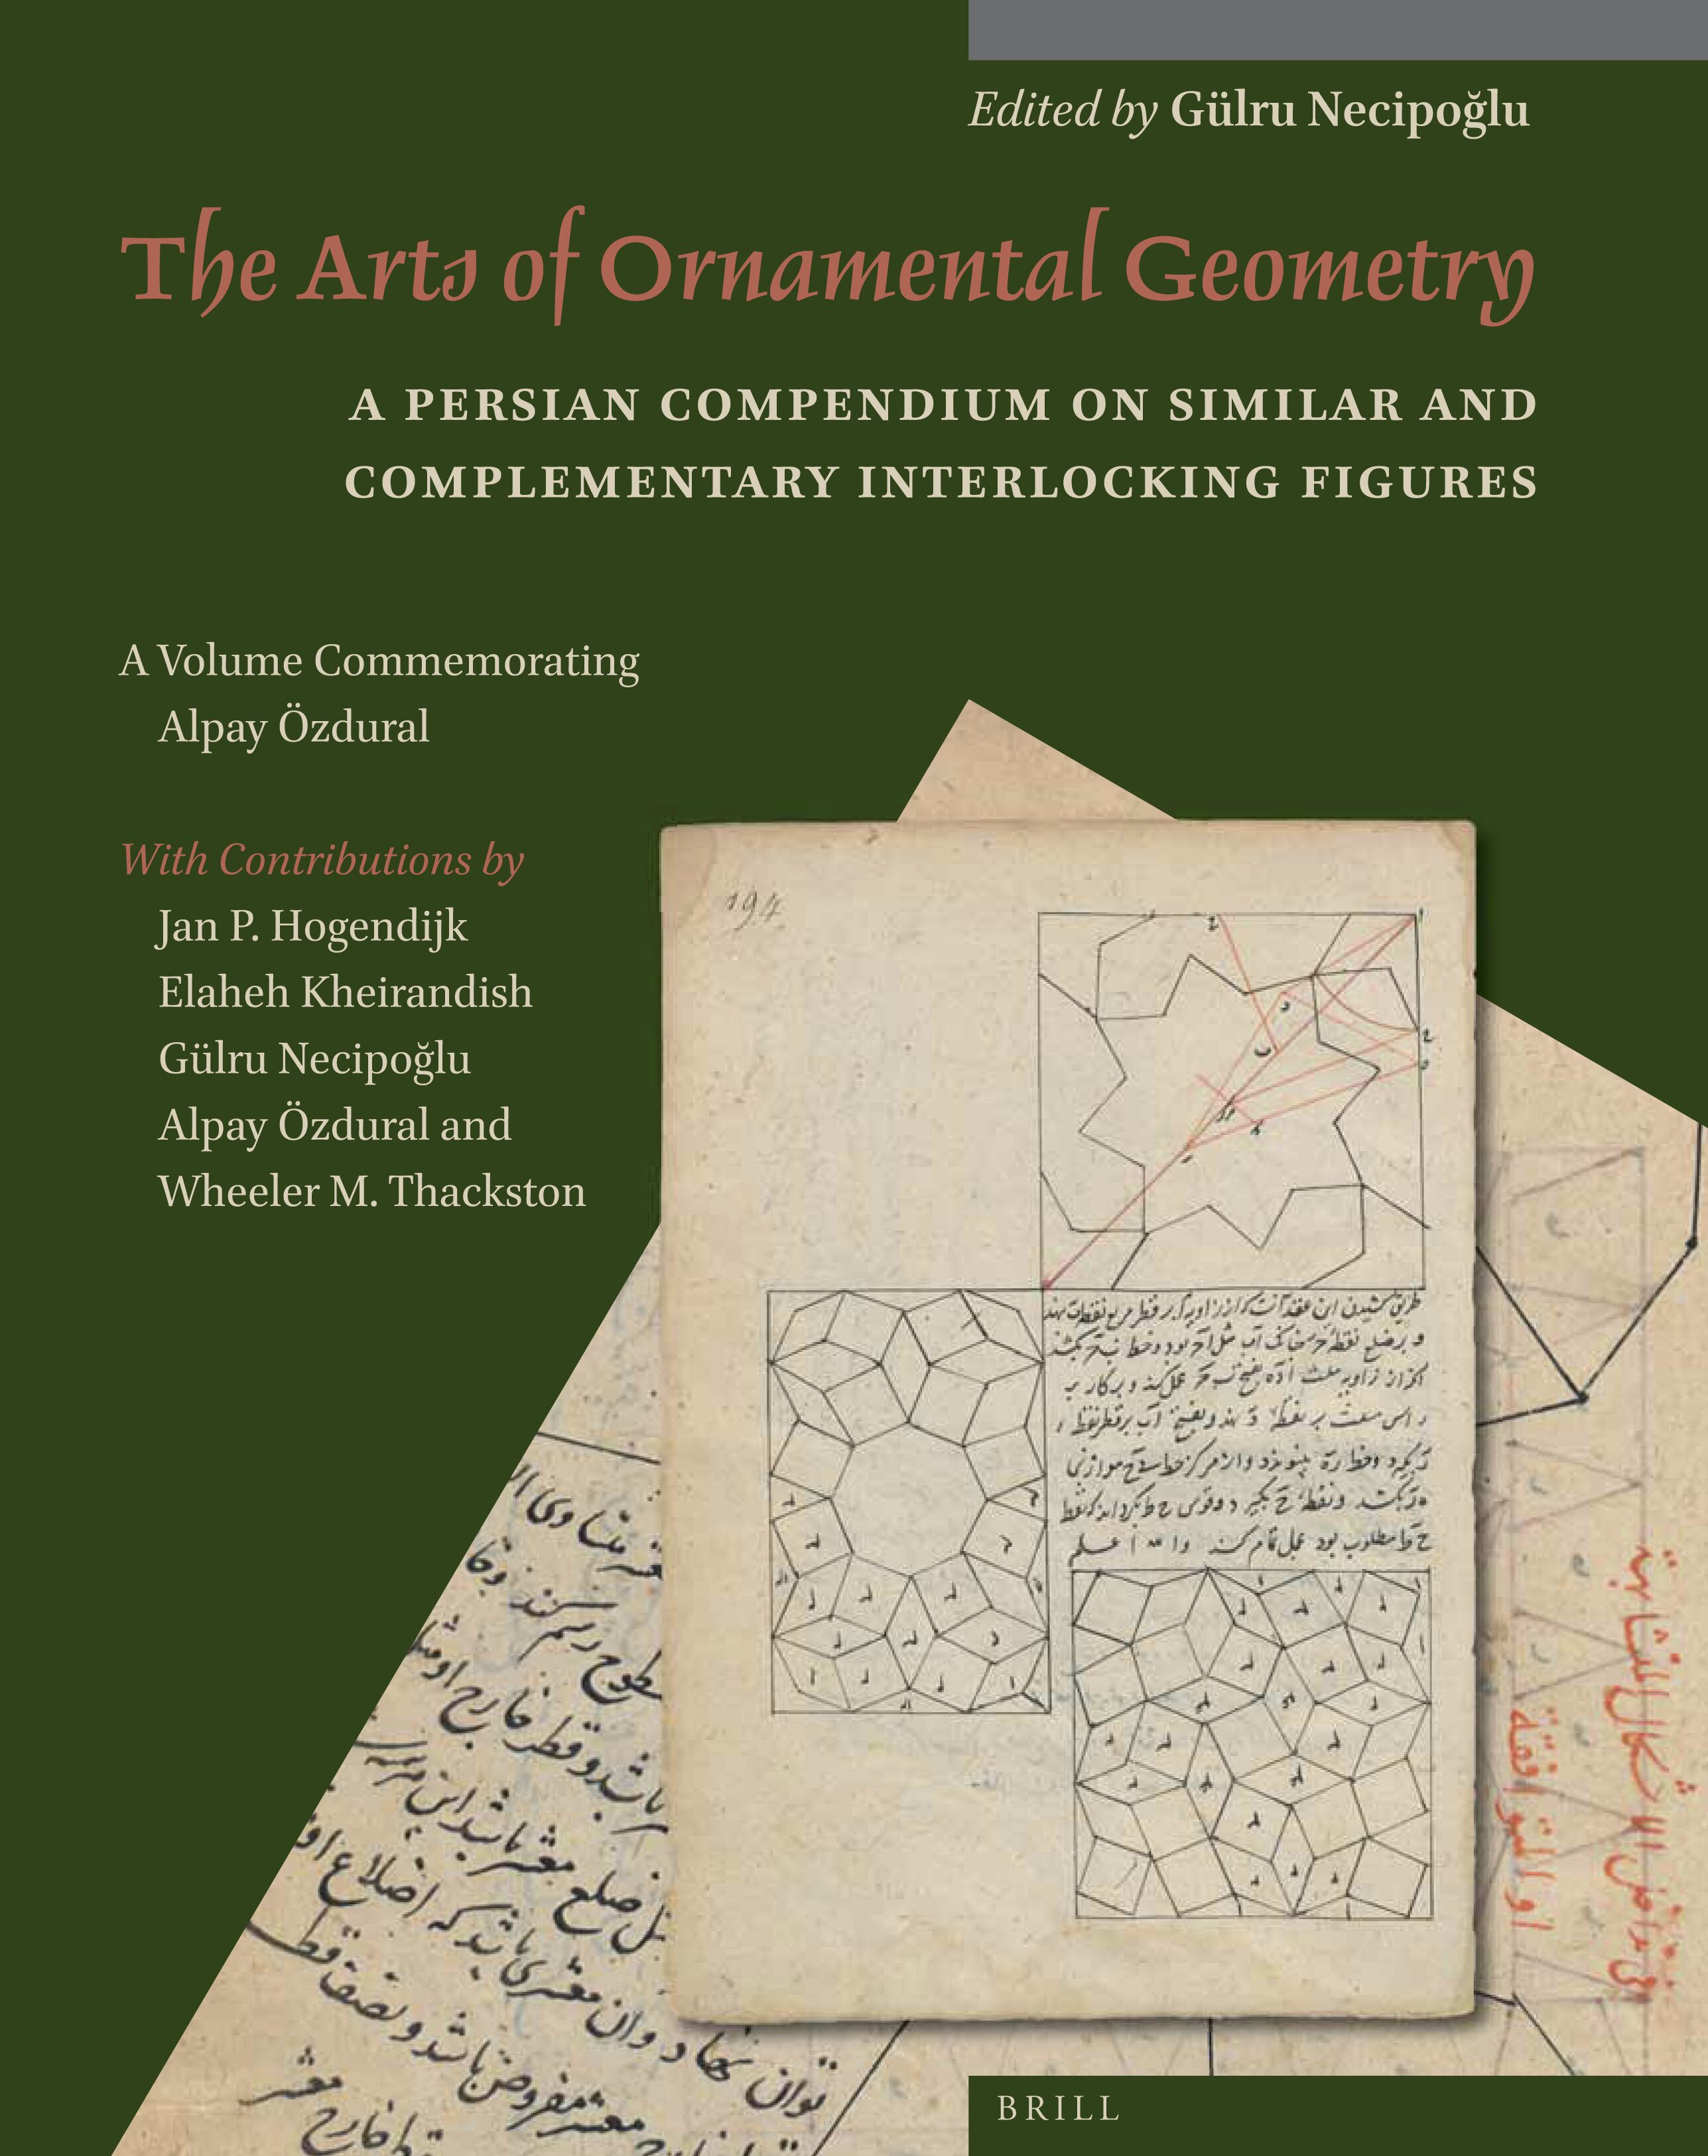 The Arts of Ornamental Geometry:  A Persian Compendium on Similar and Complementary Interlocking Figures.  A Volume Commemorating Alpay Özdural